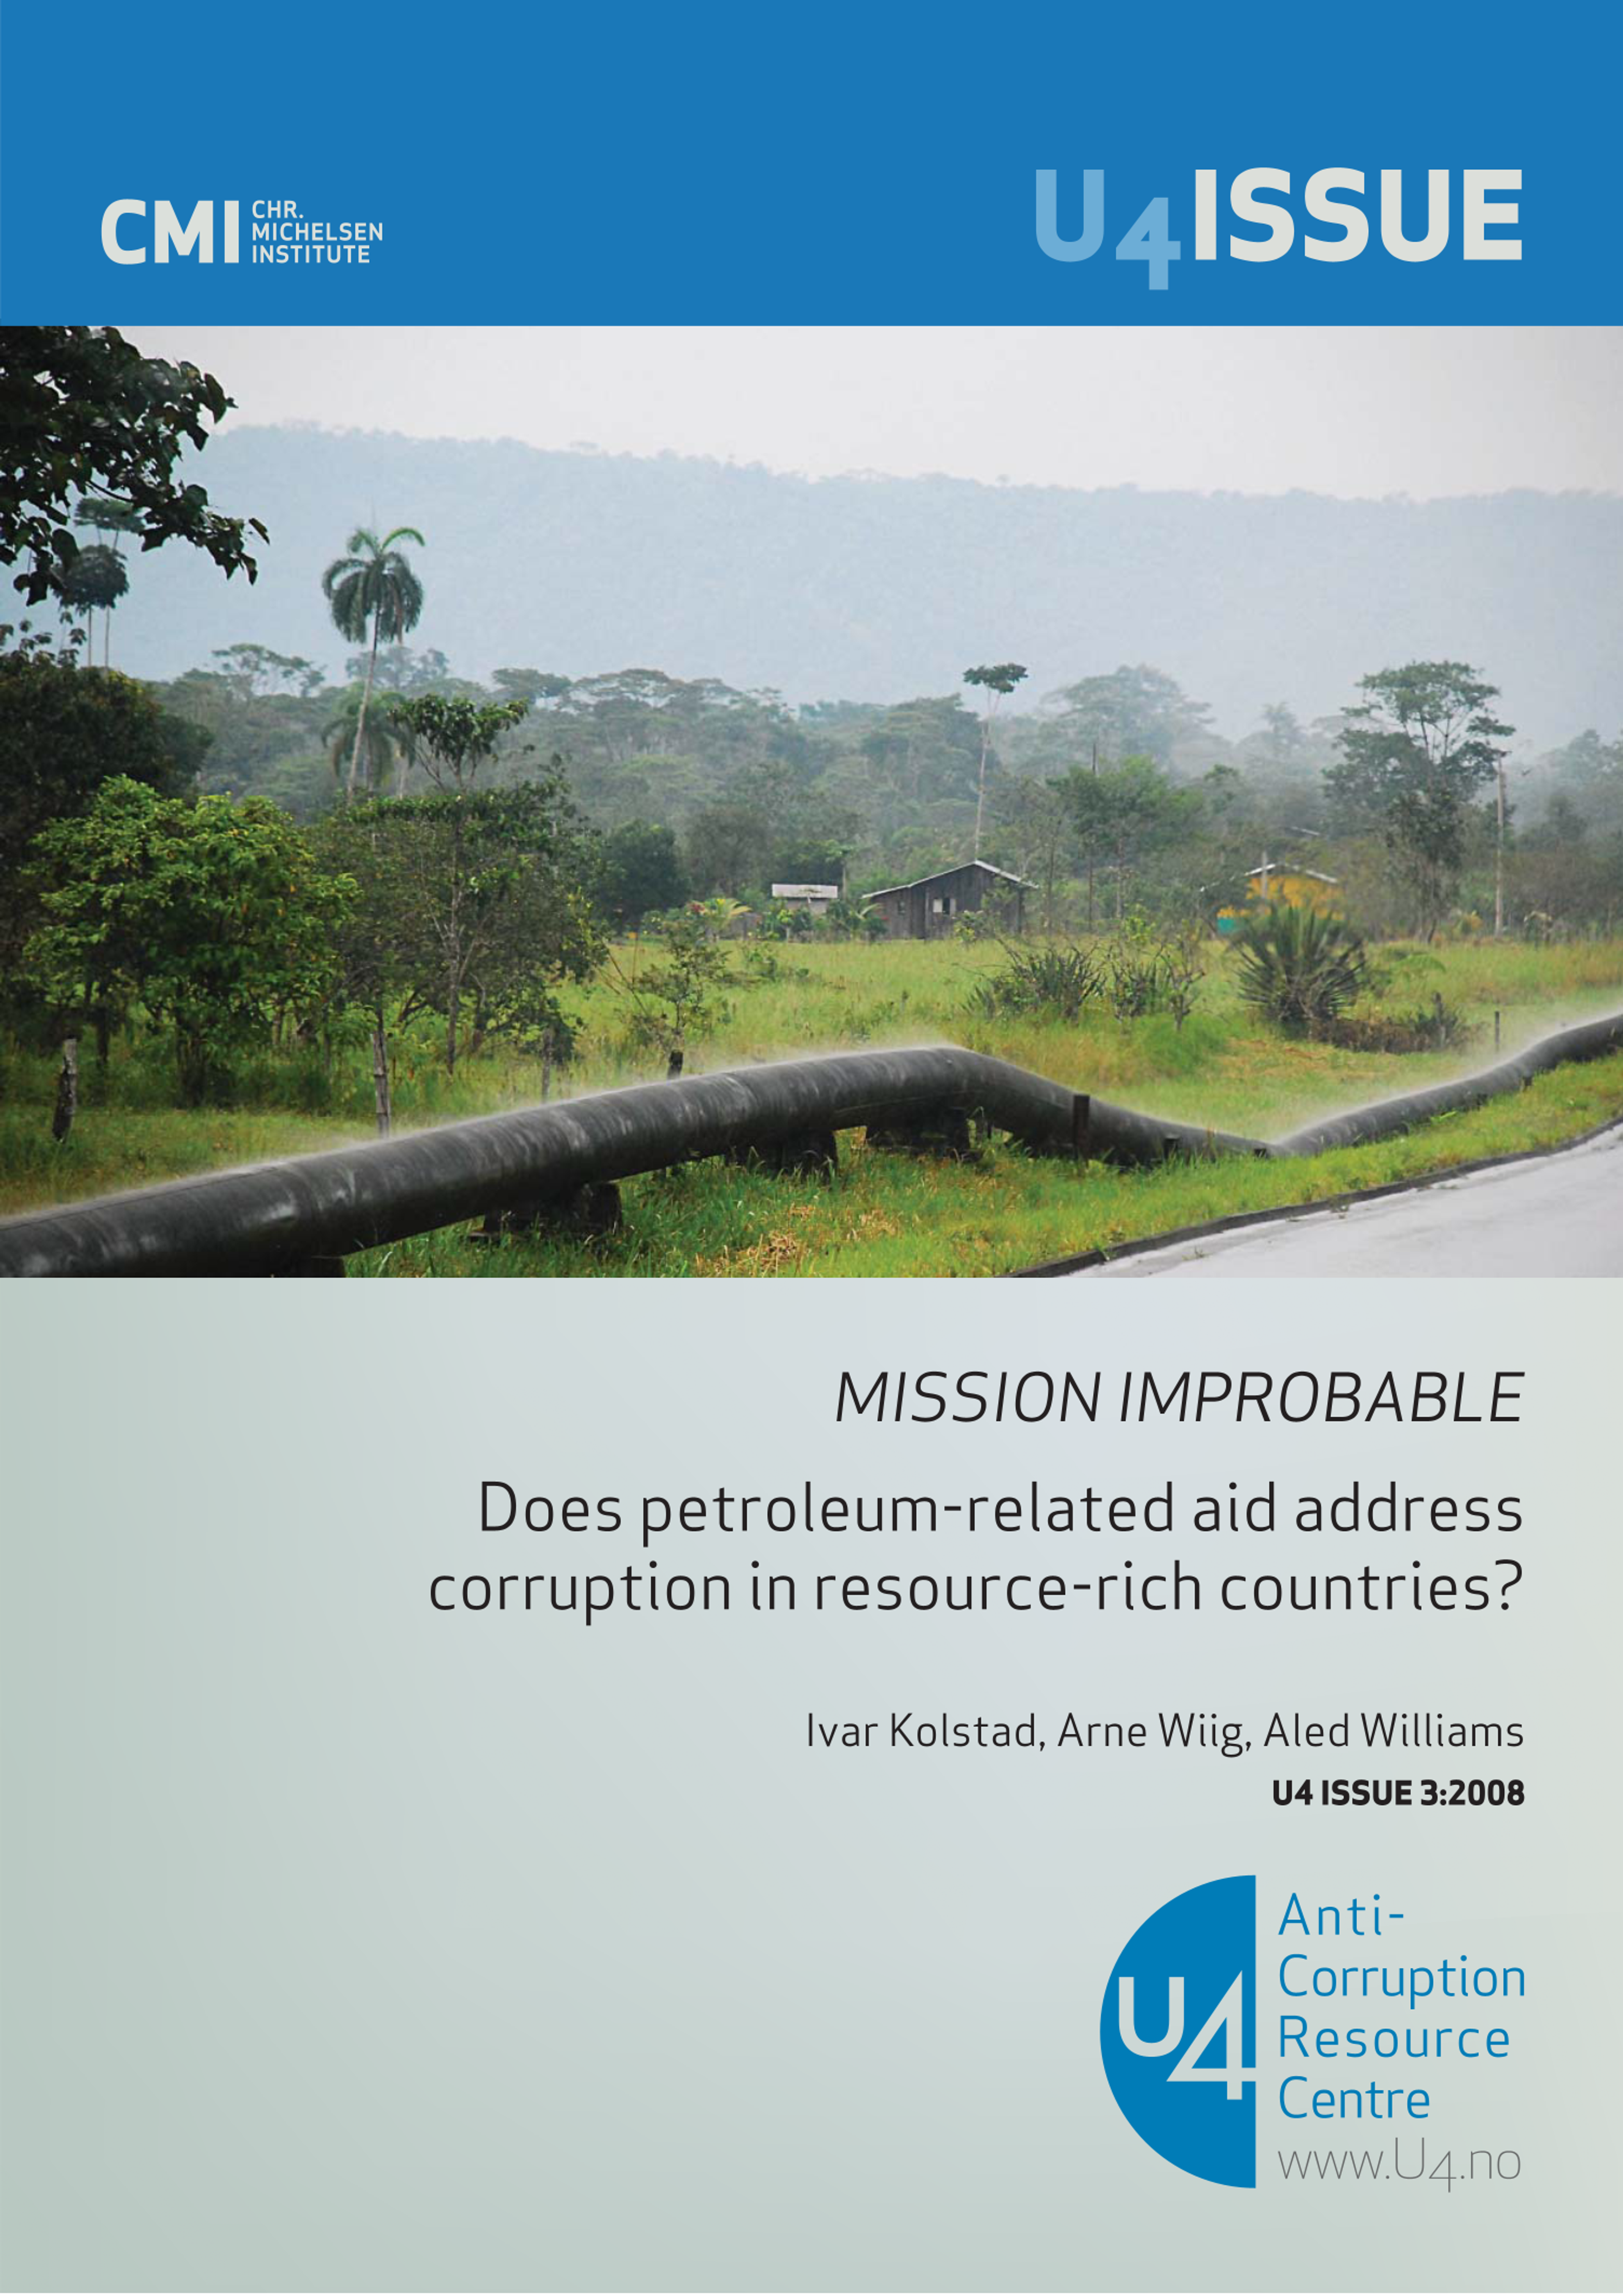 Mission Improbable: Does petroleum-related aid address corruption in resource-rich countries? 